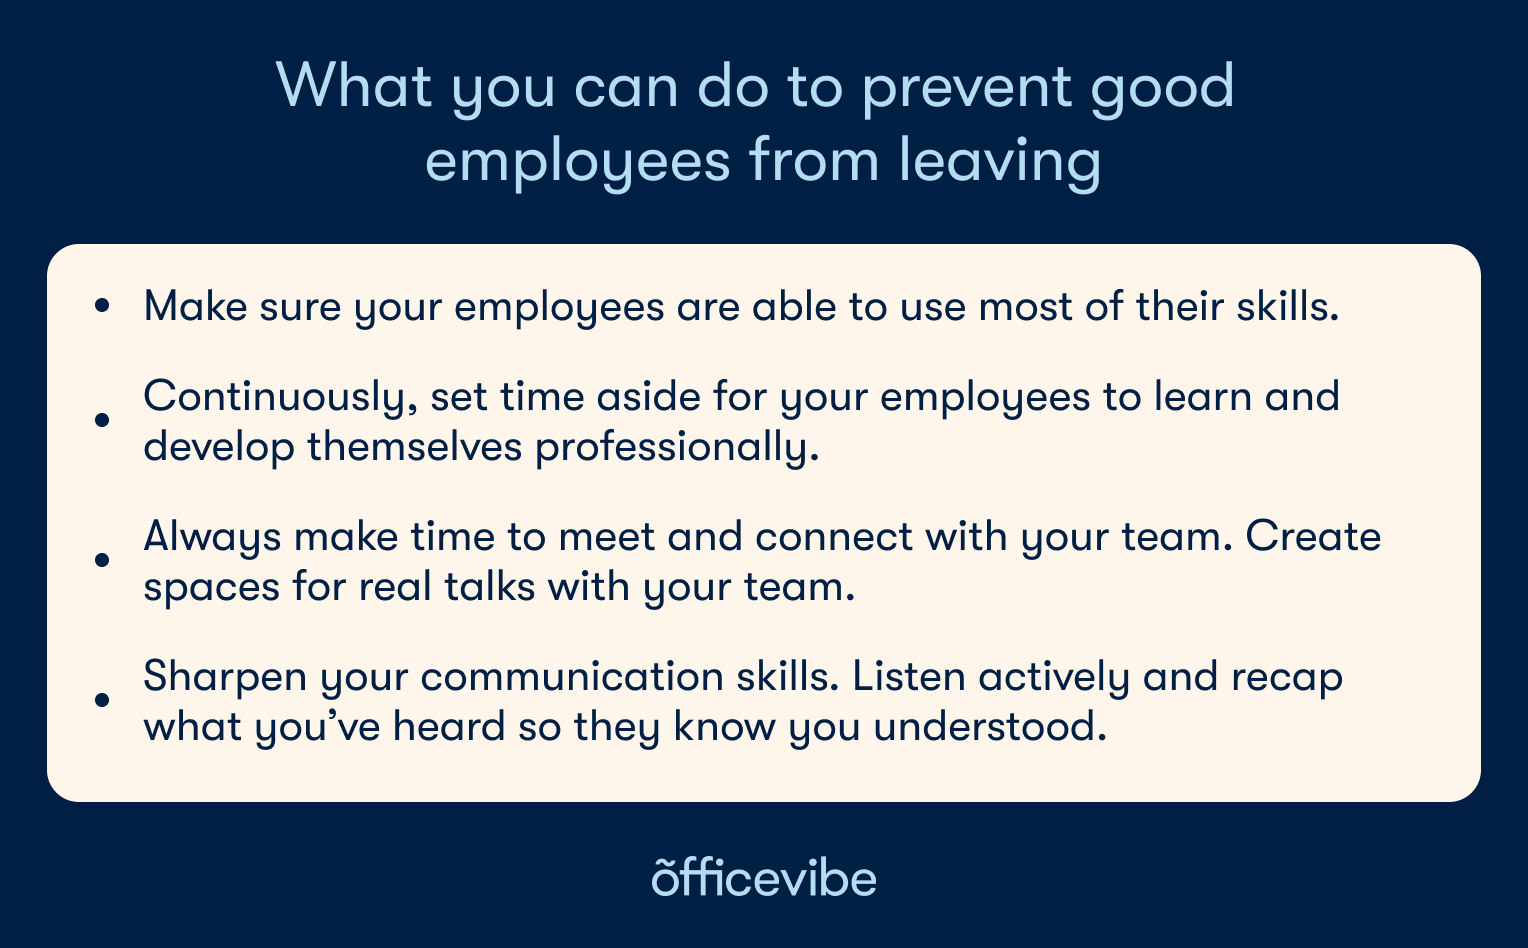 Key points from the article: Make sure your employees are able to use most of their skills, Continuously, set time aside for your employees to learn and develop themselves professional, Always make time to meet and connect with your team,.Create spaces for real talks with your team, sharpen your communication skills. Listen actively and recap what you’ve heard so they know you understood.